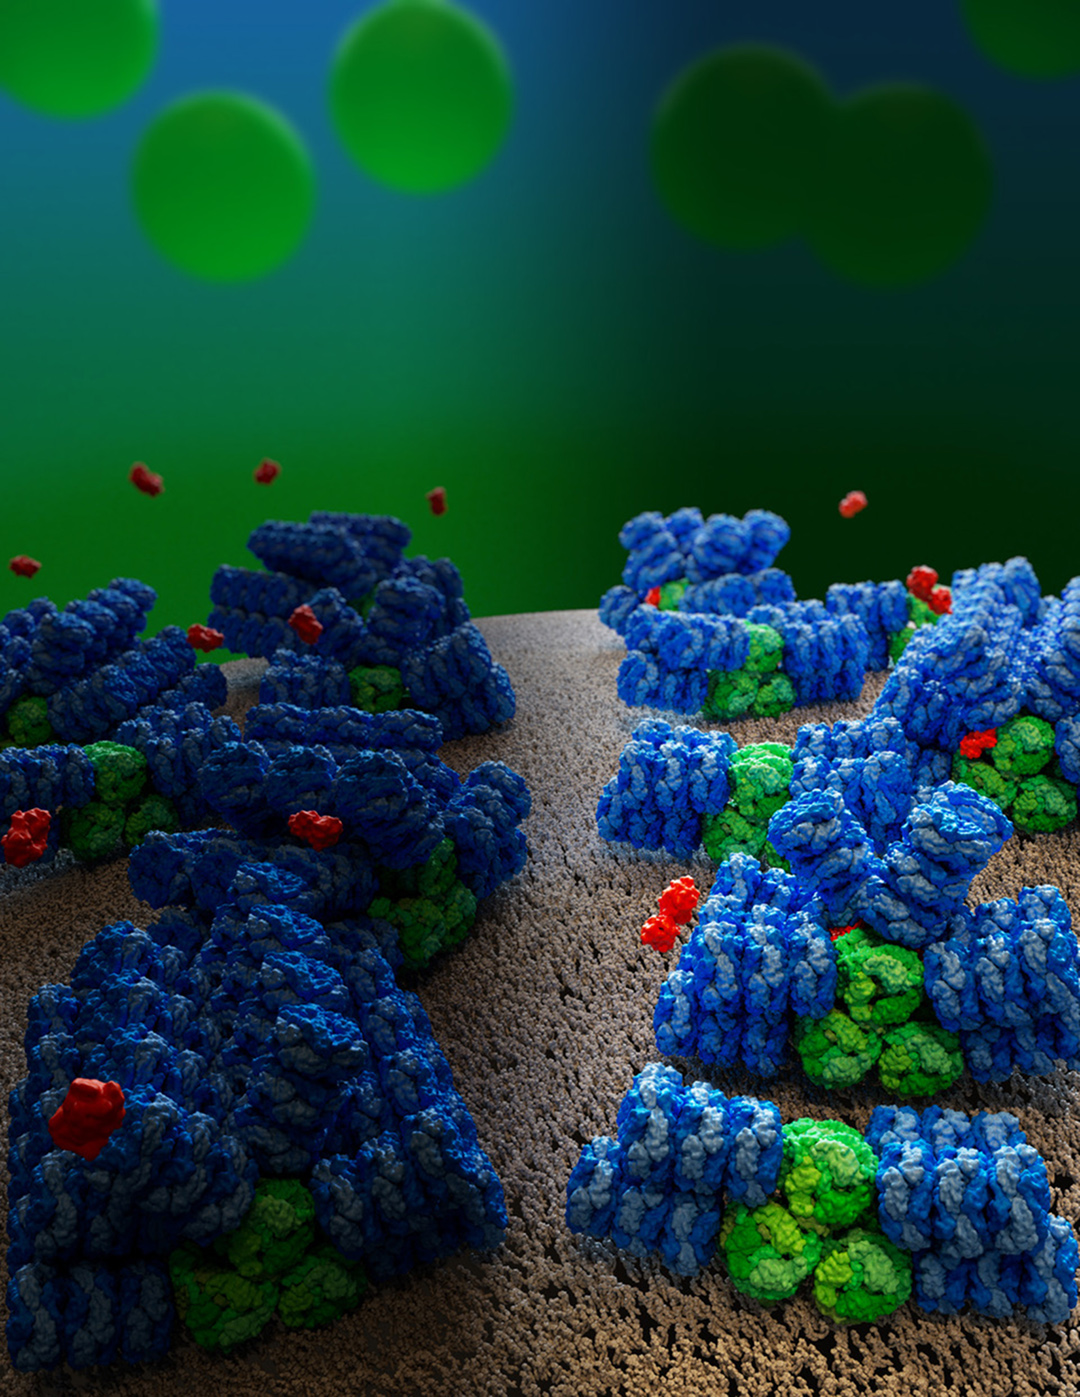 An illustration shows several phycobilisomes bound to a beige cell membrane. The phycobilisomes consist of three green core cylinders stacked in a triangle with blue rods extending from them. Some are bound to orange proteins. In the background, green cells float in the distance.